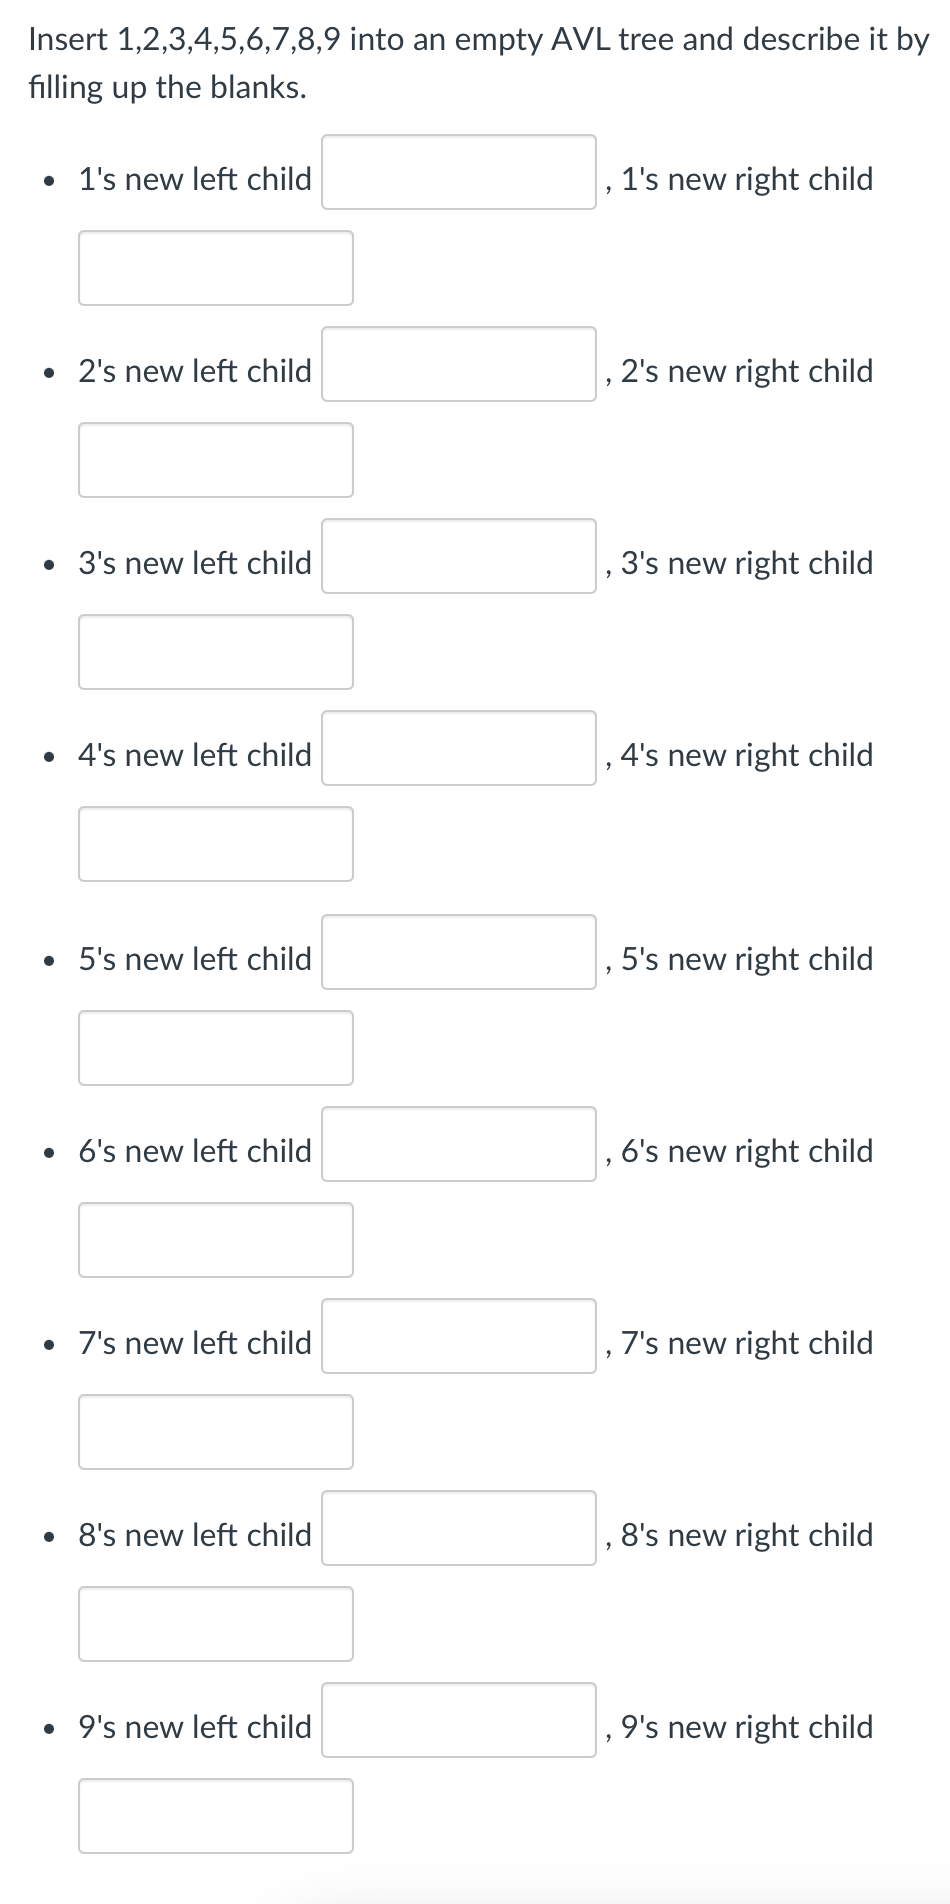 Insert 1,2,3,4,5,6,7,8,9 into an empty AVL tree and describe it by
filling up the blanks.
• 1's new left child
• 2's new left child
• 3's new left child
• 4's new left child
• 5's new left child
• 6's new left child
• 7's new left child
• 8's new left child
• 9's new left child
2
1's new right child
, 2's new right child
3's new right child
, 4's new right child
5's new right child
6's new right child
, 7's new right child
8's new right child
9's new right child
"